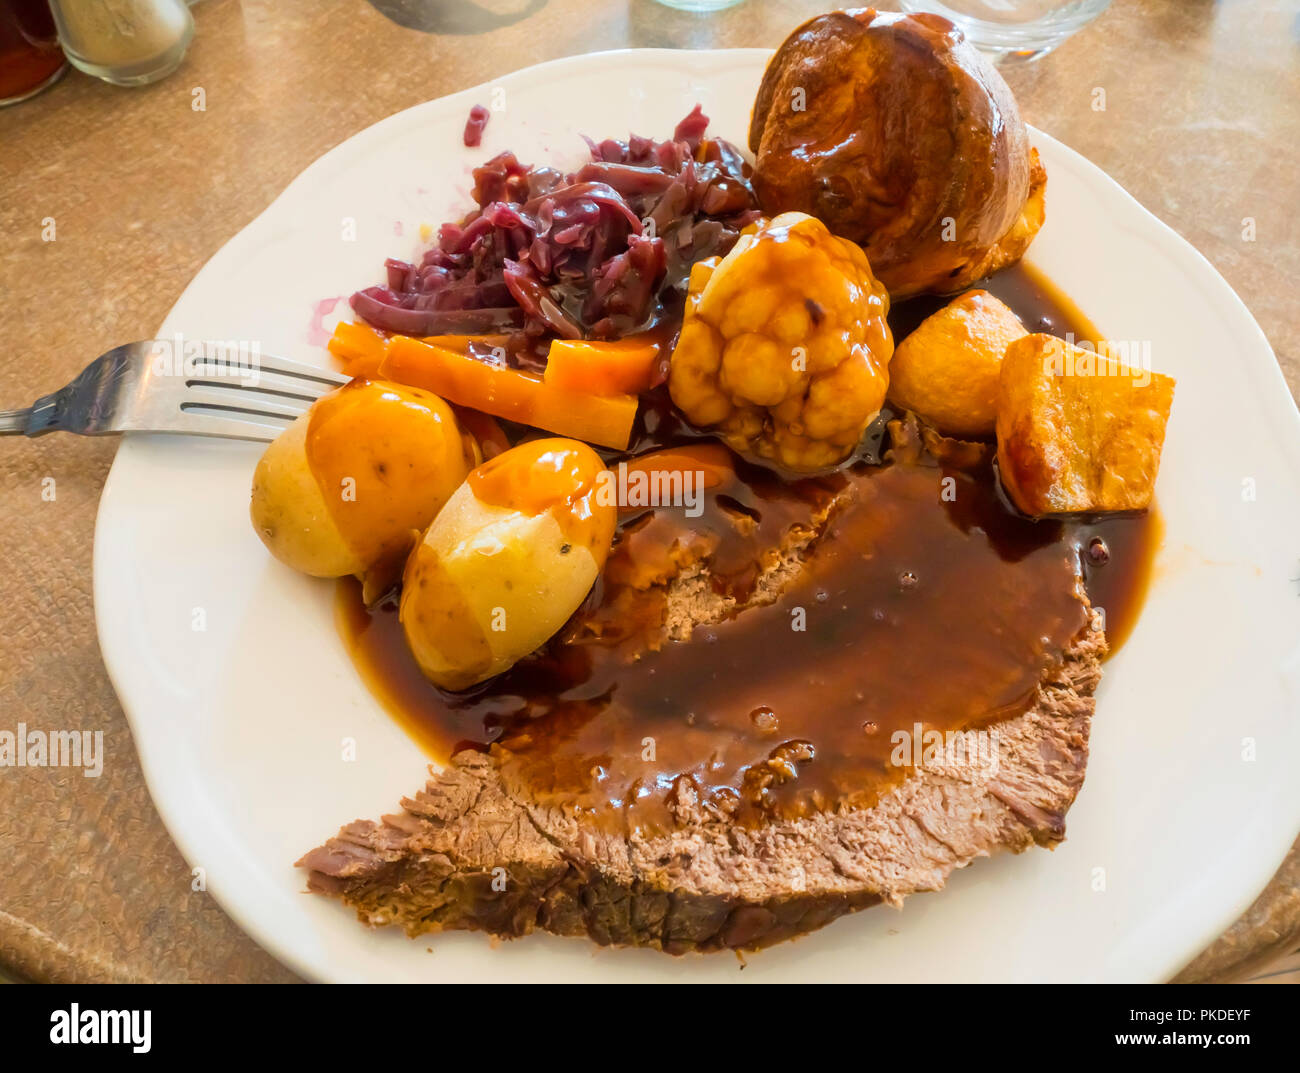 Sunday Lunch main course Roast Beef Yorkshire pudding vegetables and gravy at a farm cafÃ© Stock Photo